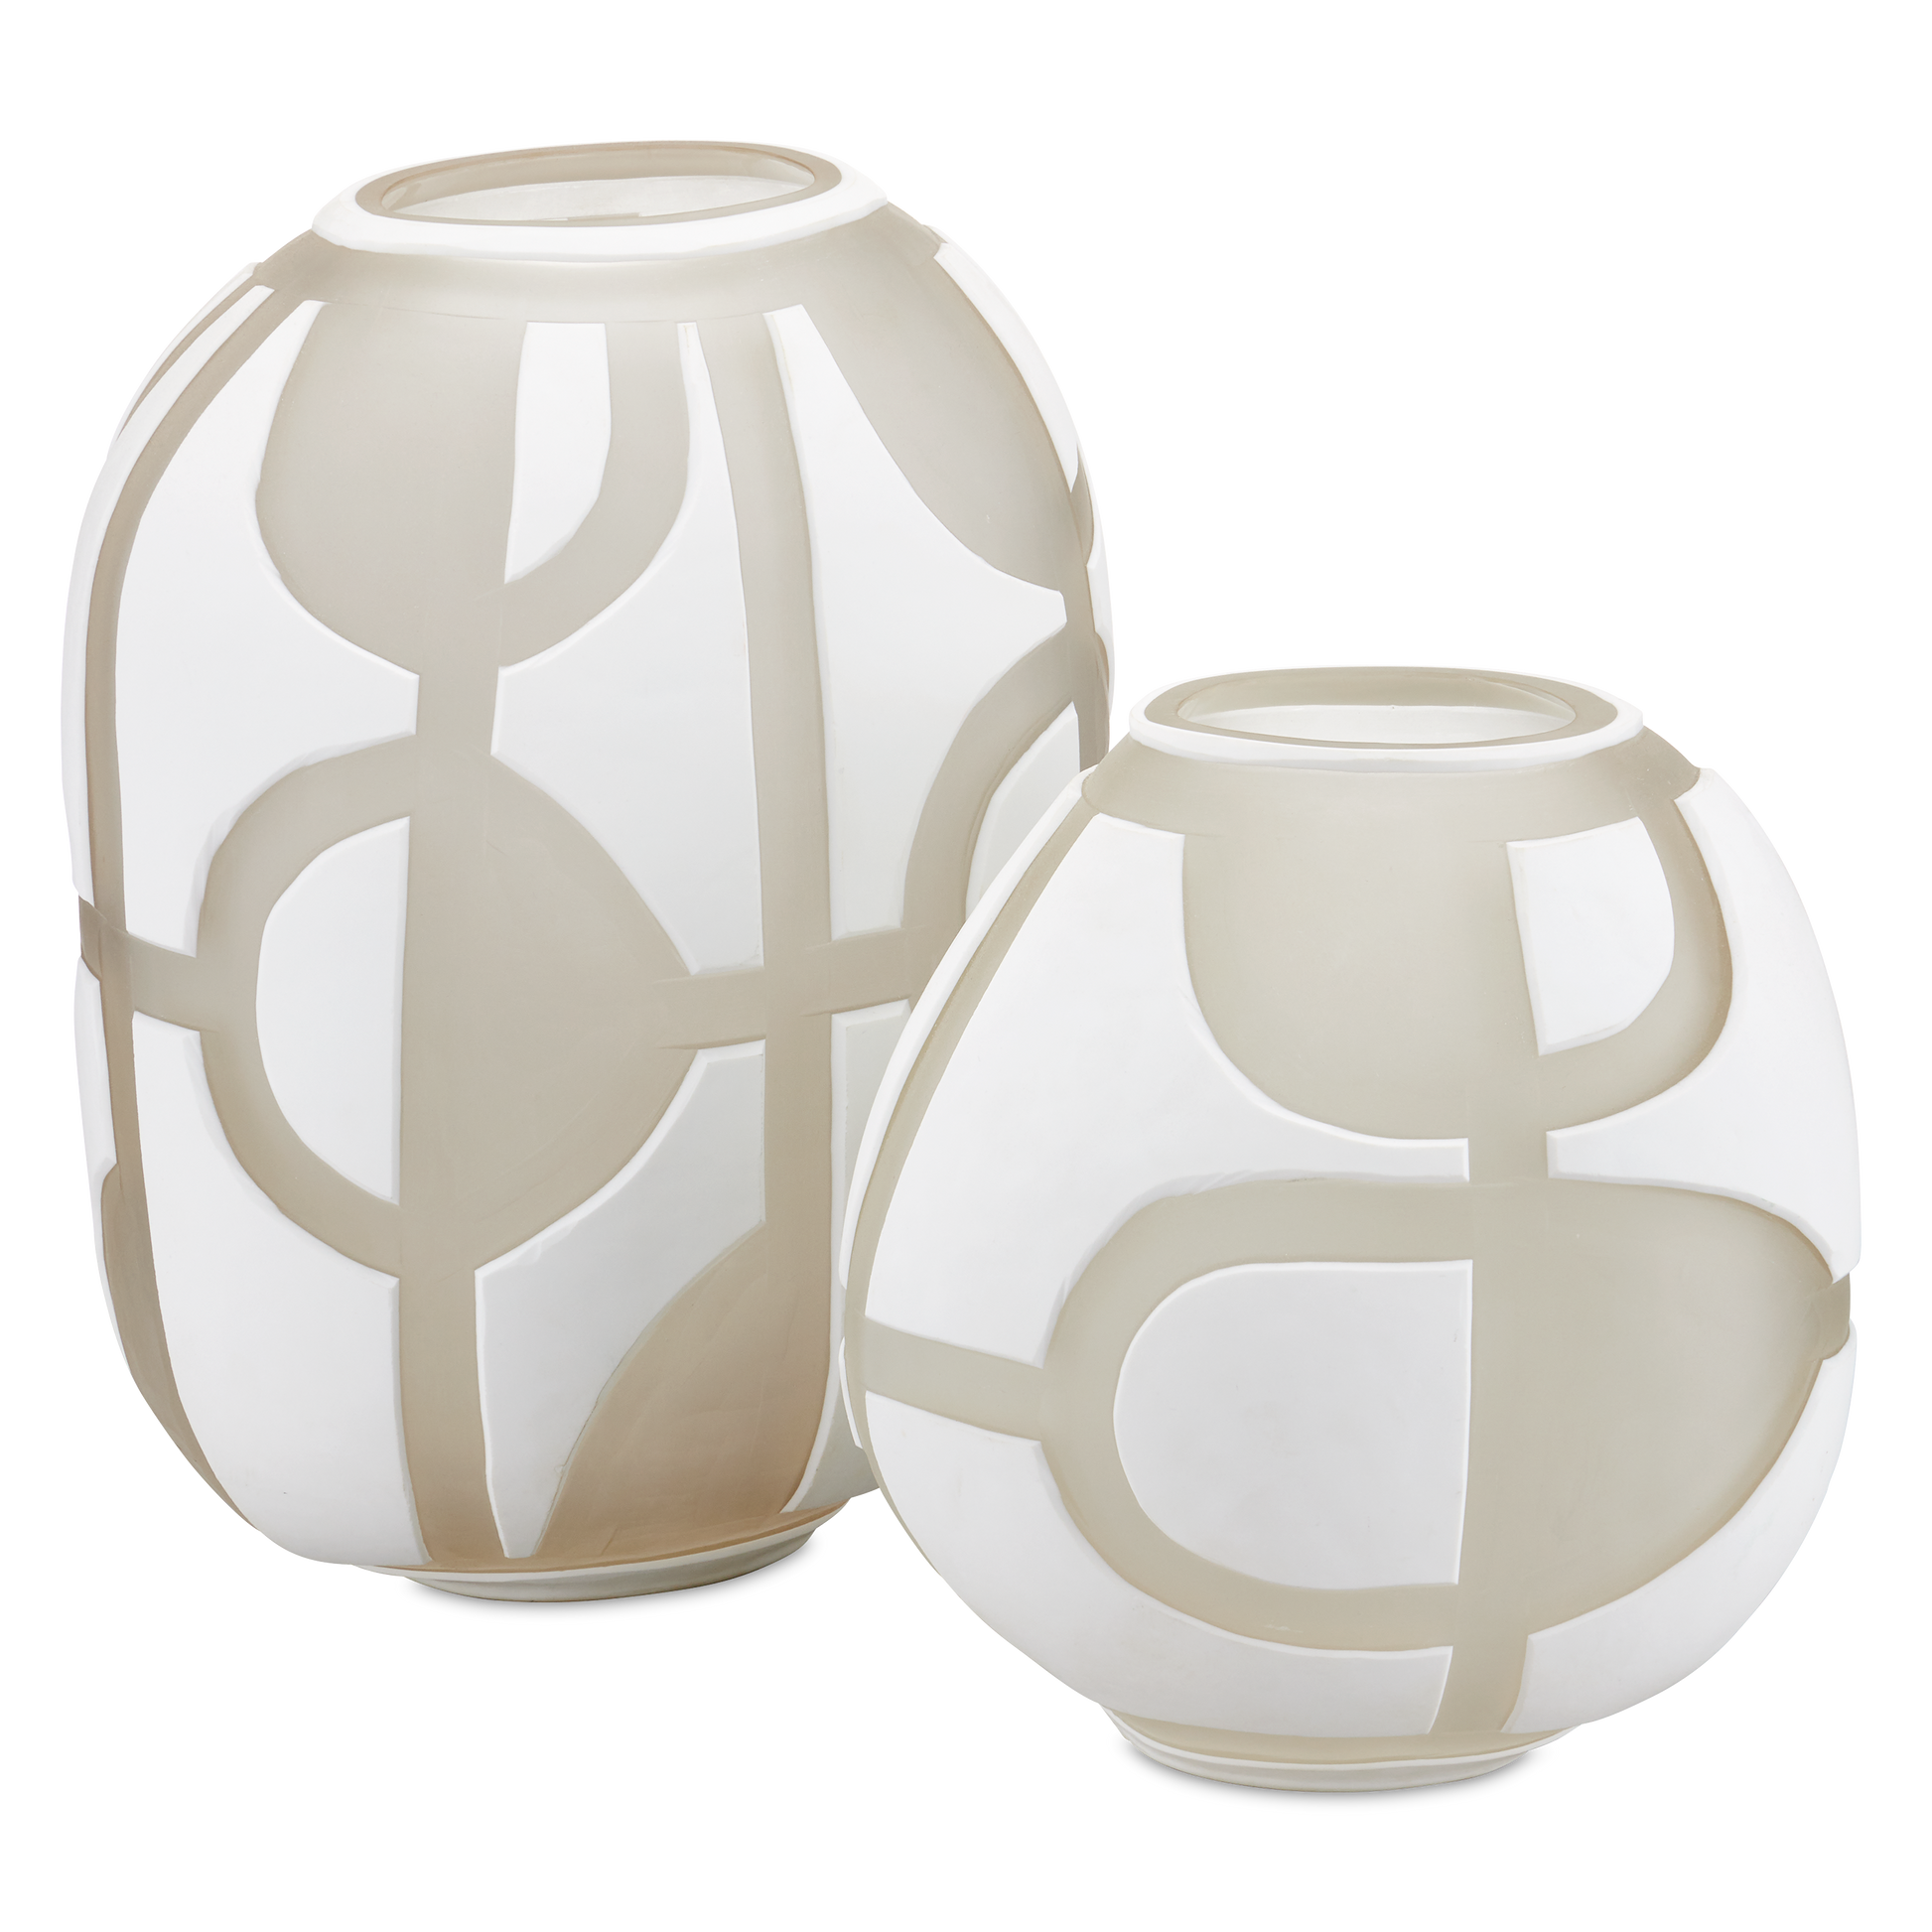 The Art Decortif White Vase Set of 2 by Currey & Company | Luxury Vases, Jars & Bowls | Willow & Albert Home